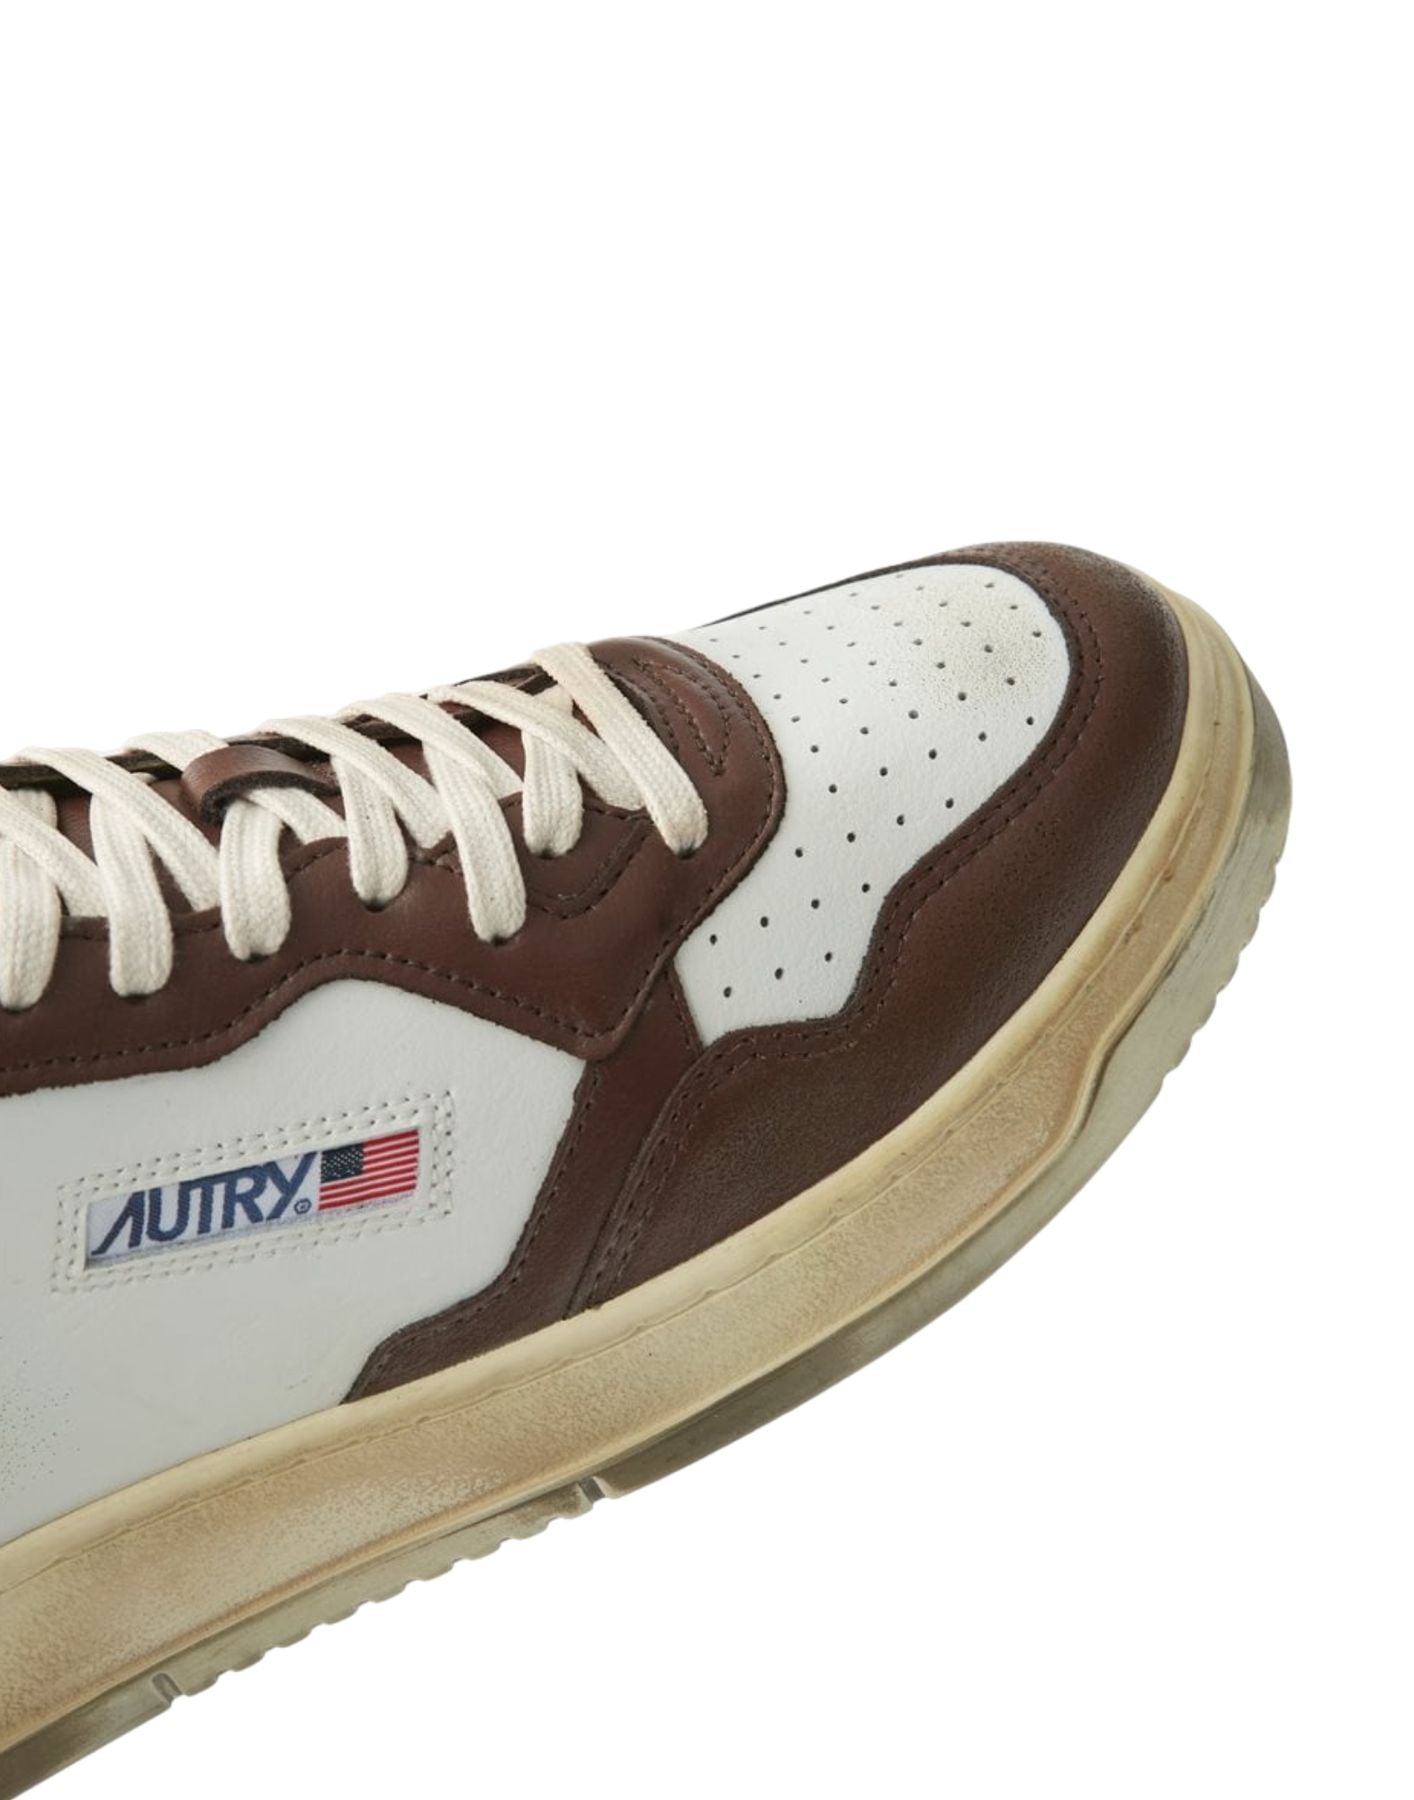 Chaussures homme AVLM VL03 Autry